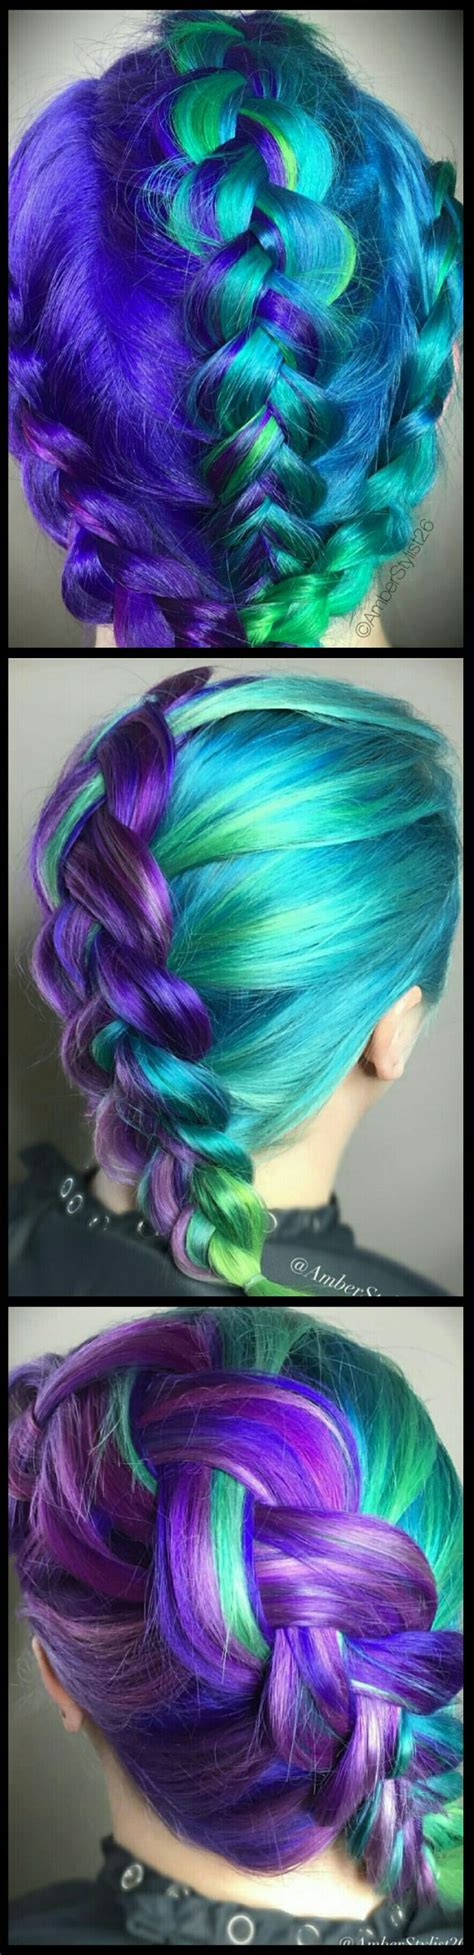 Blue turquoise purple green braided dyed hair color @amberstylist26 | Pink hair dye, Hair color ...